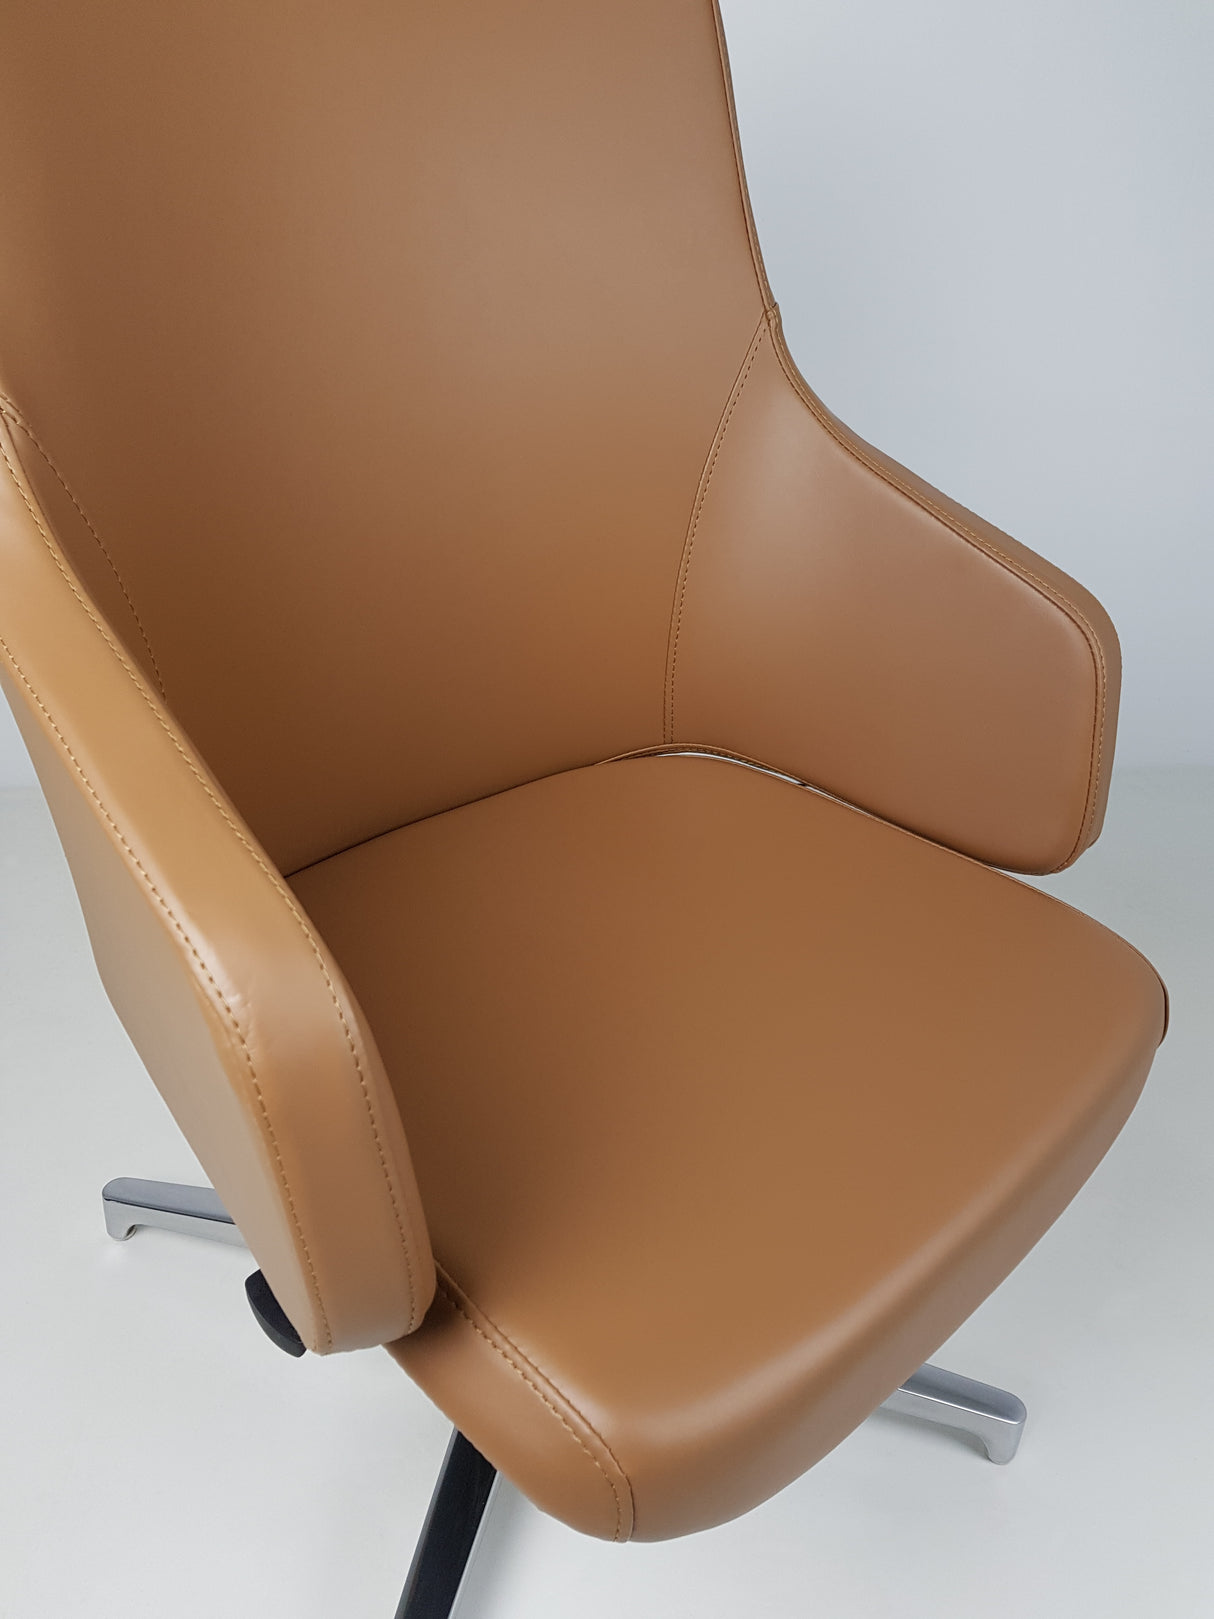 Tan Leather Visitor Office Chair with Seat Slide - CHA-1823C